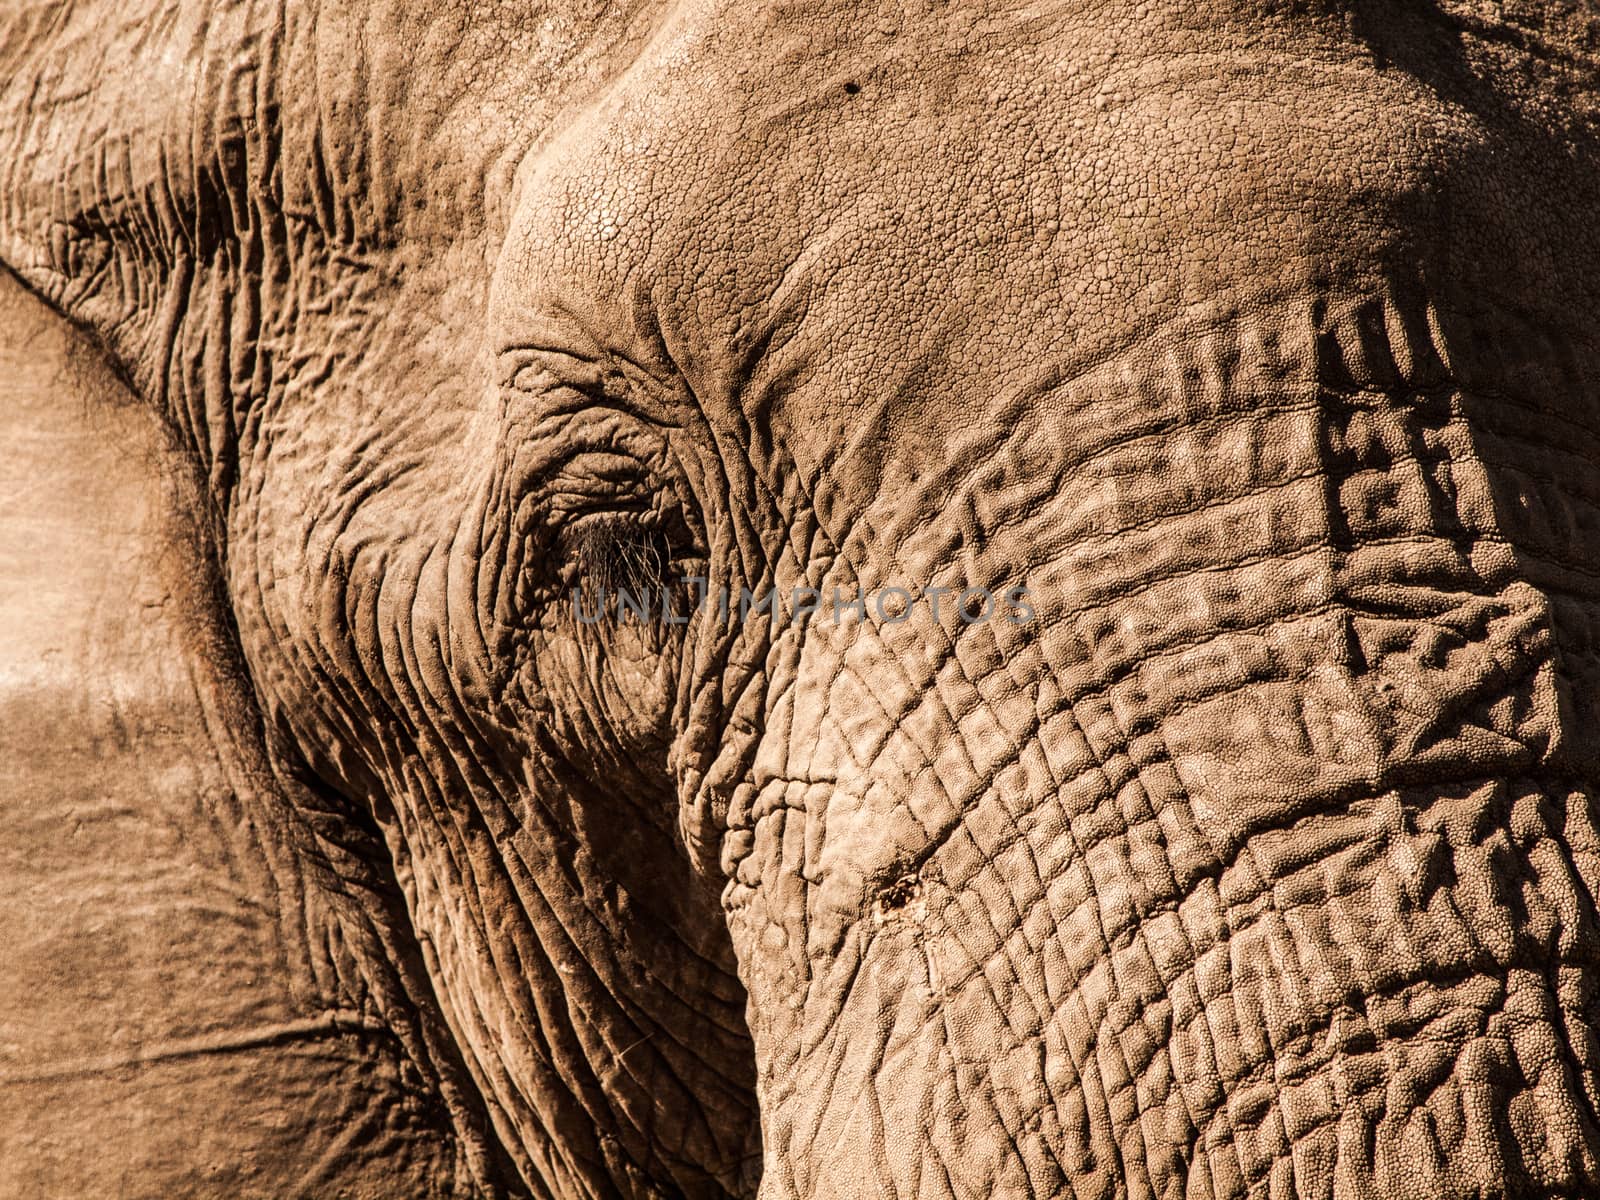 Detail of african elephant in sunny day (Moremi Game Reserve, Botswana)